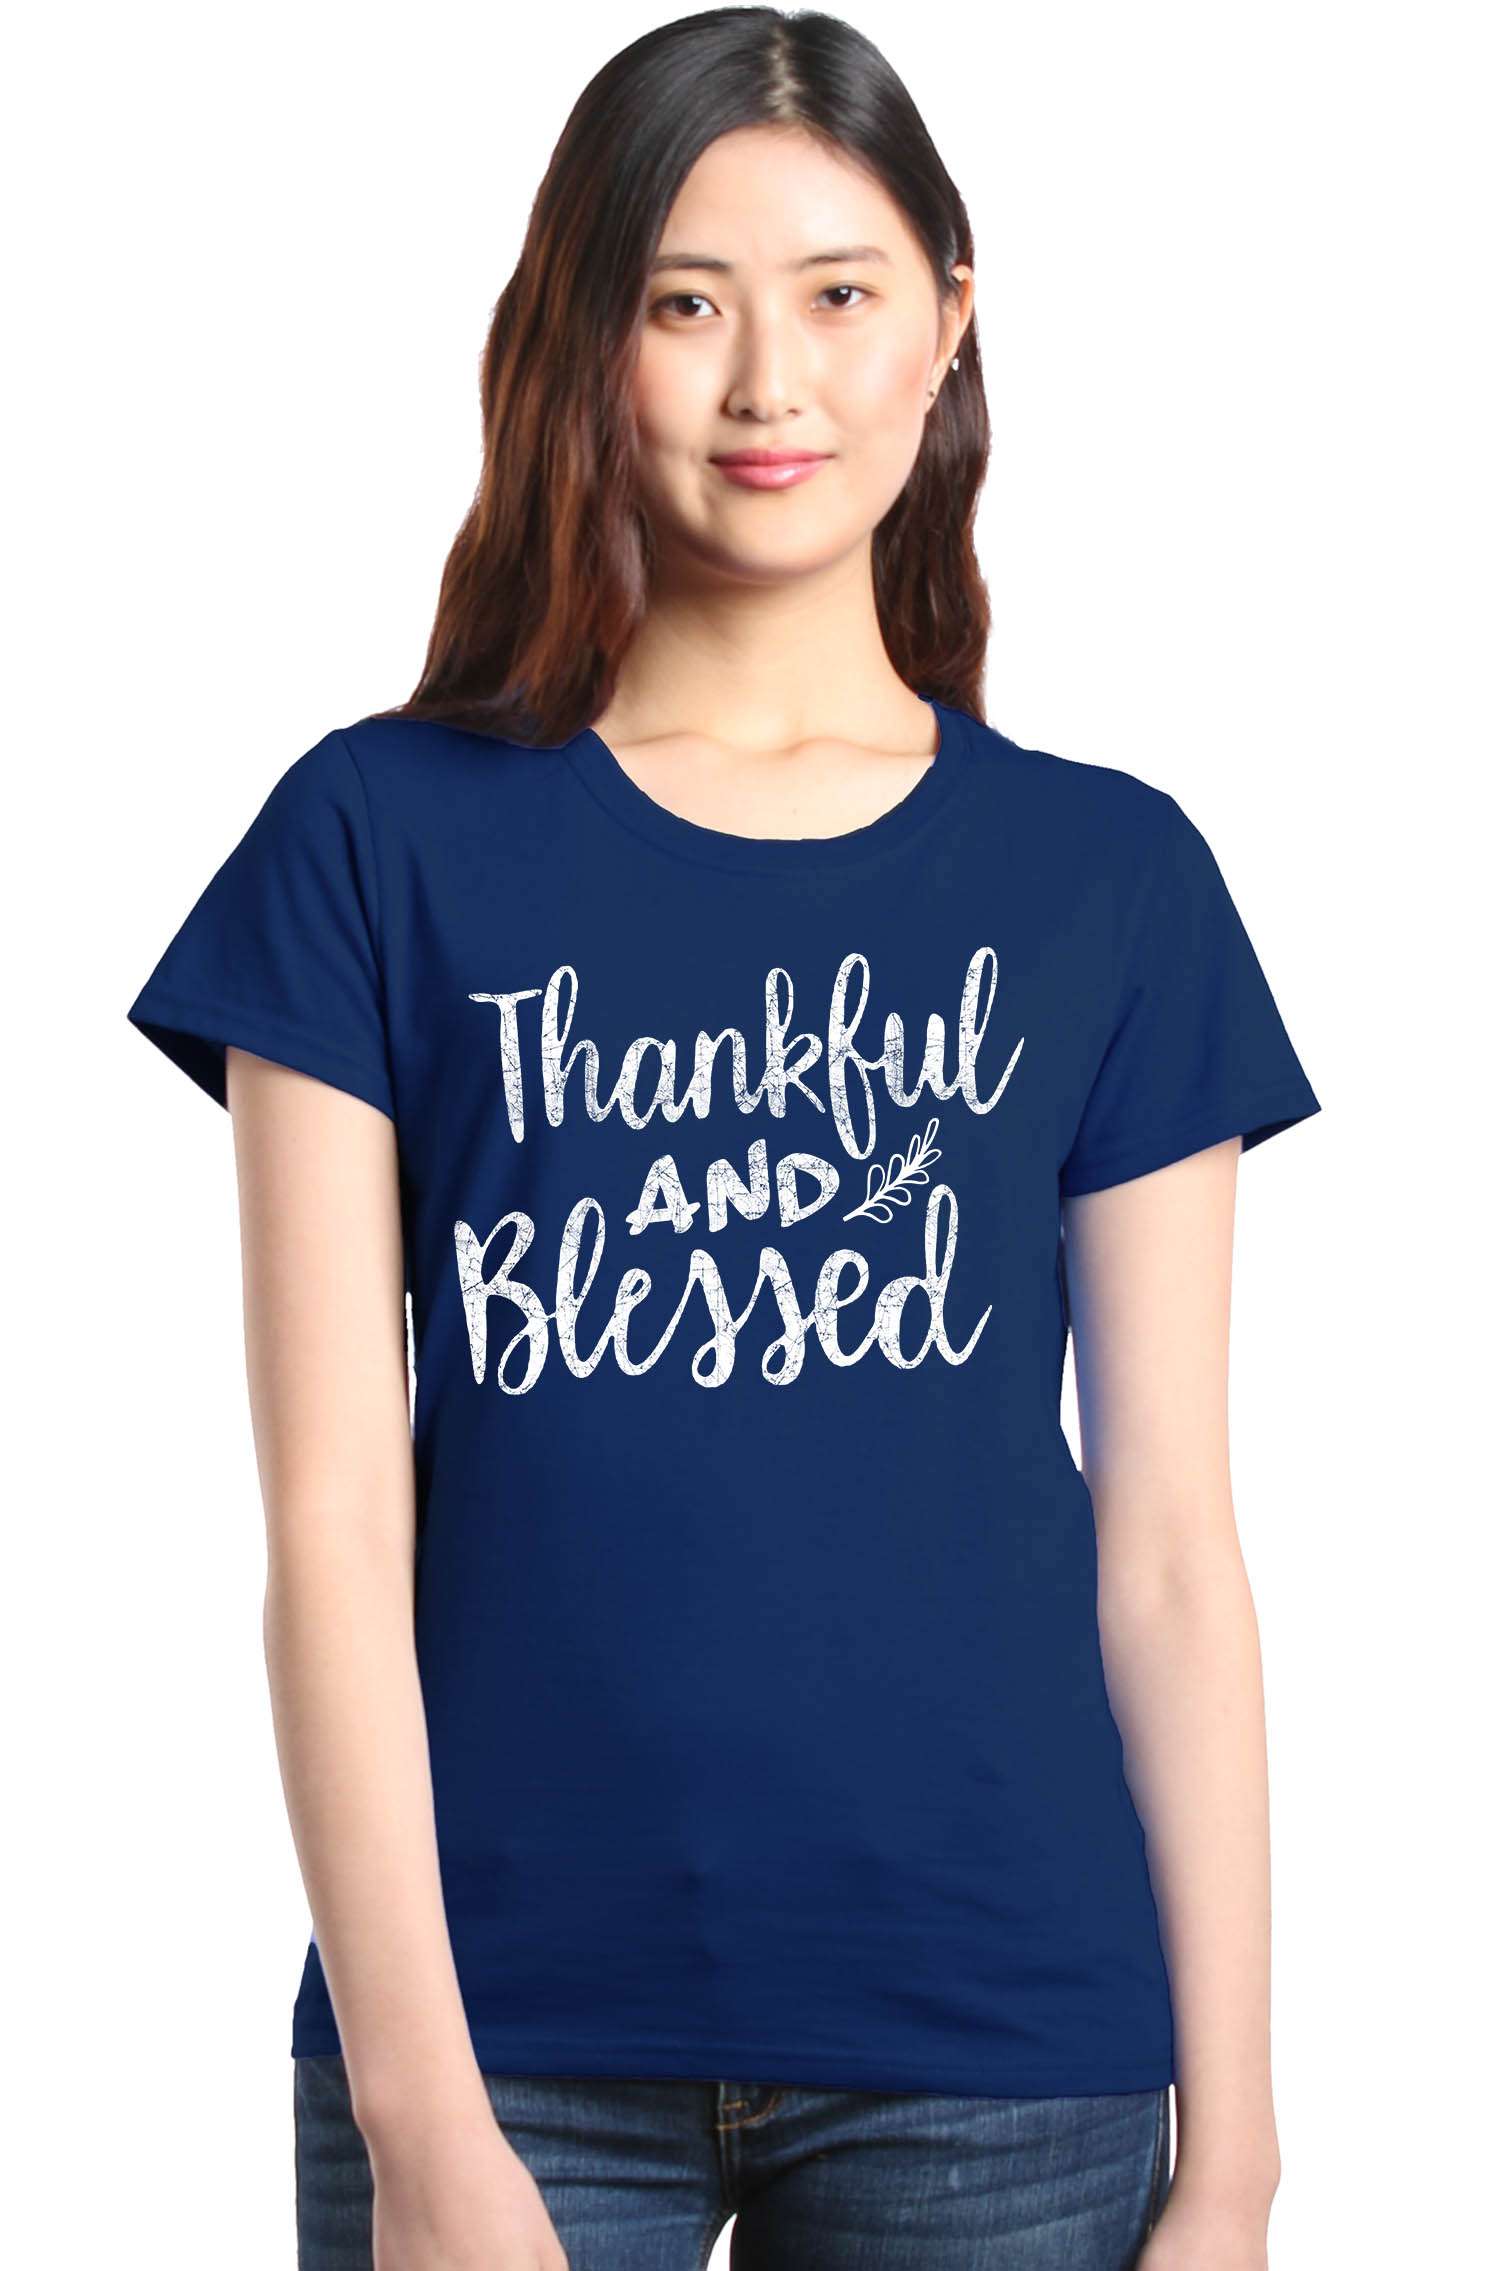 Thanksgiving T-Shirt Blessed Shirts for Women 1 